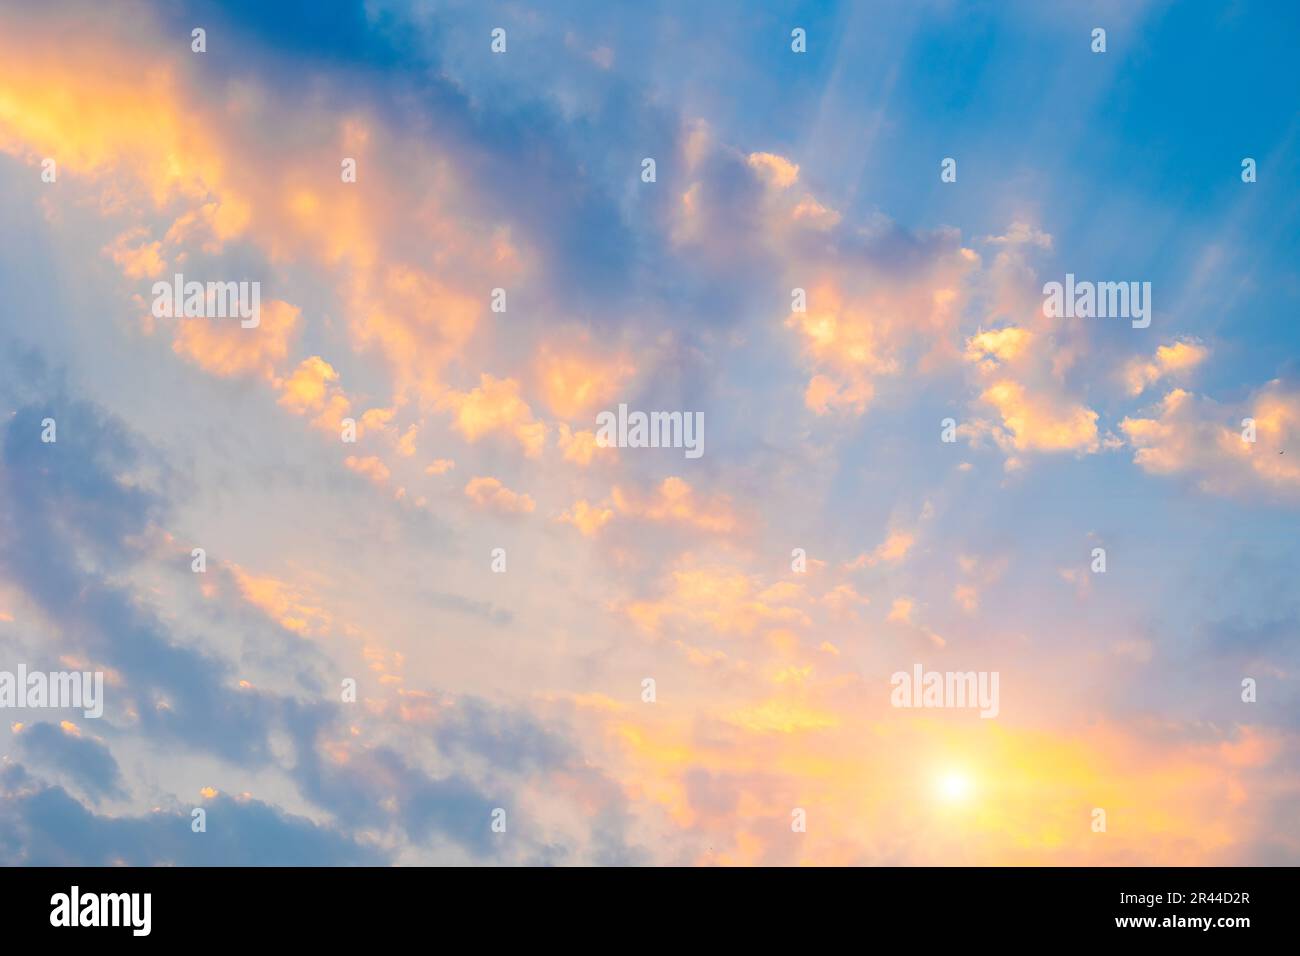 Beautiful sunset or sunrise morning day sky scatter clouds with dramatic light. Stock Photo